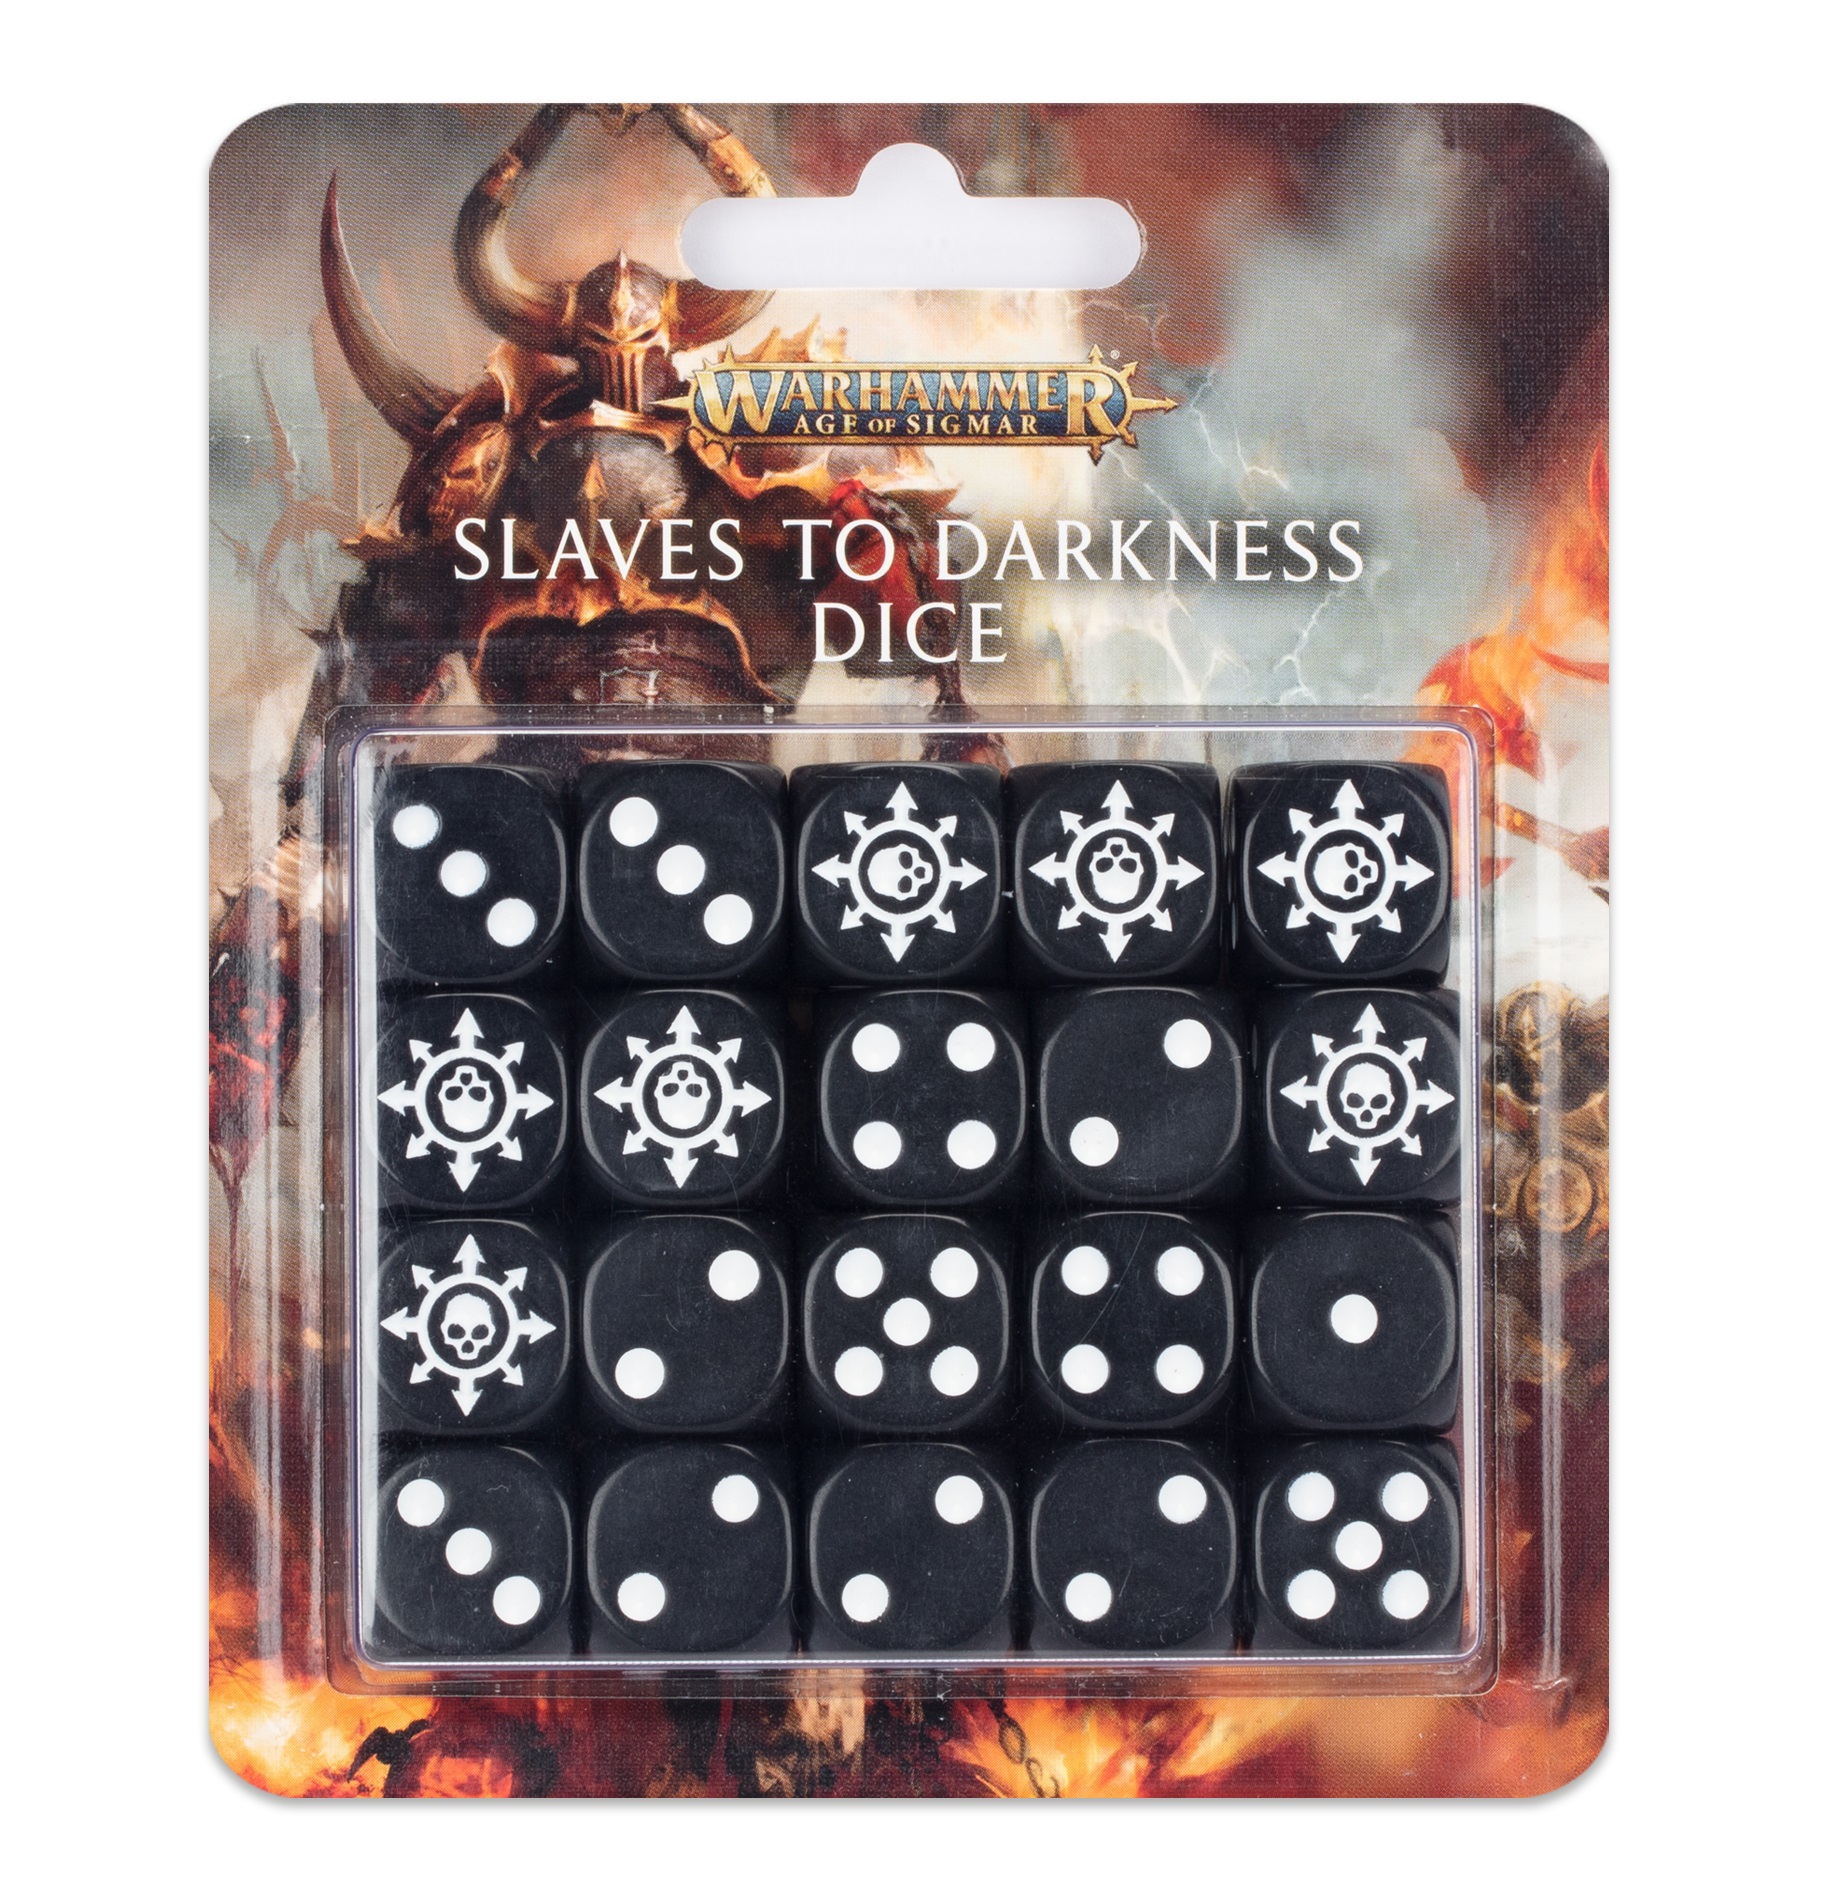 Slaves of Darkness Dice